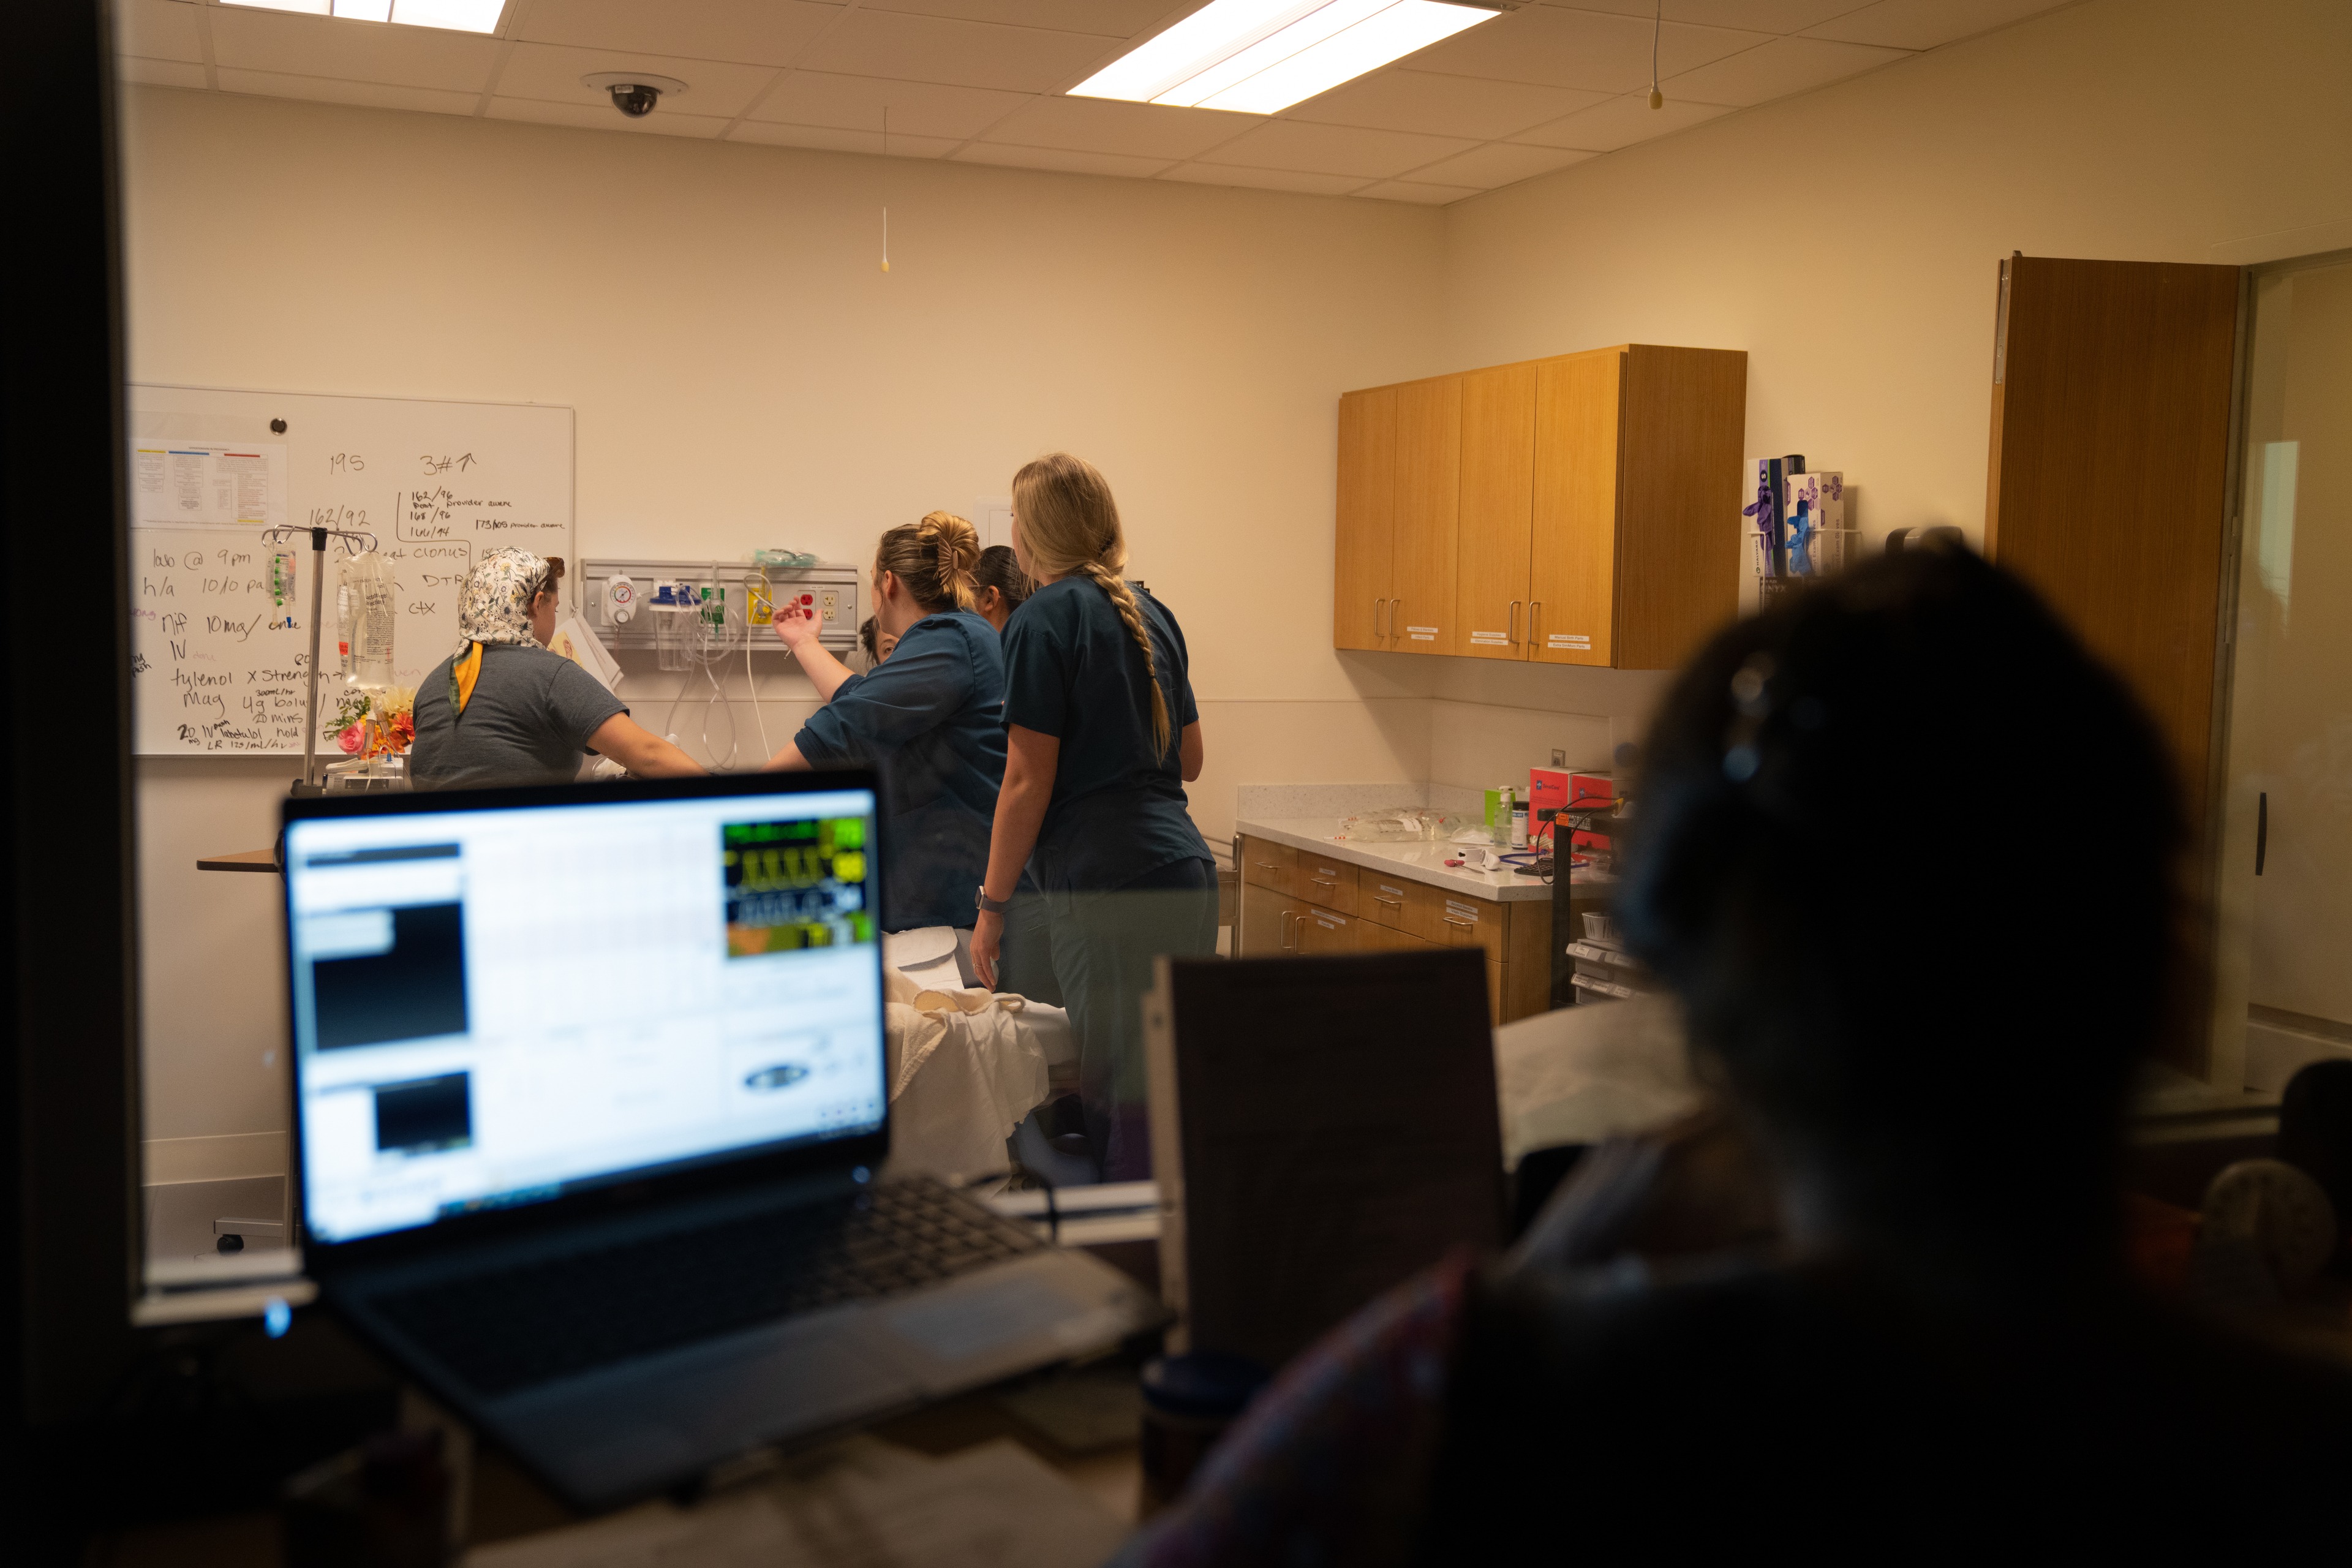 A group of people looking at a monitor and tending to a patient